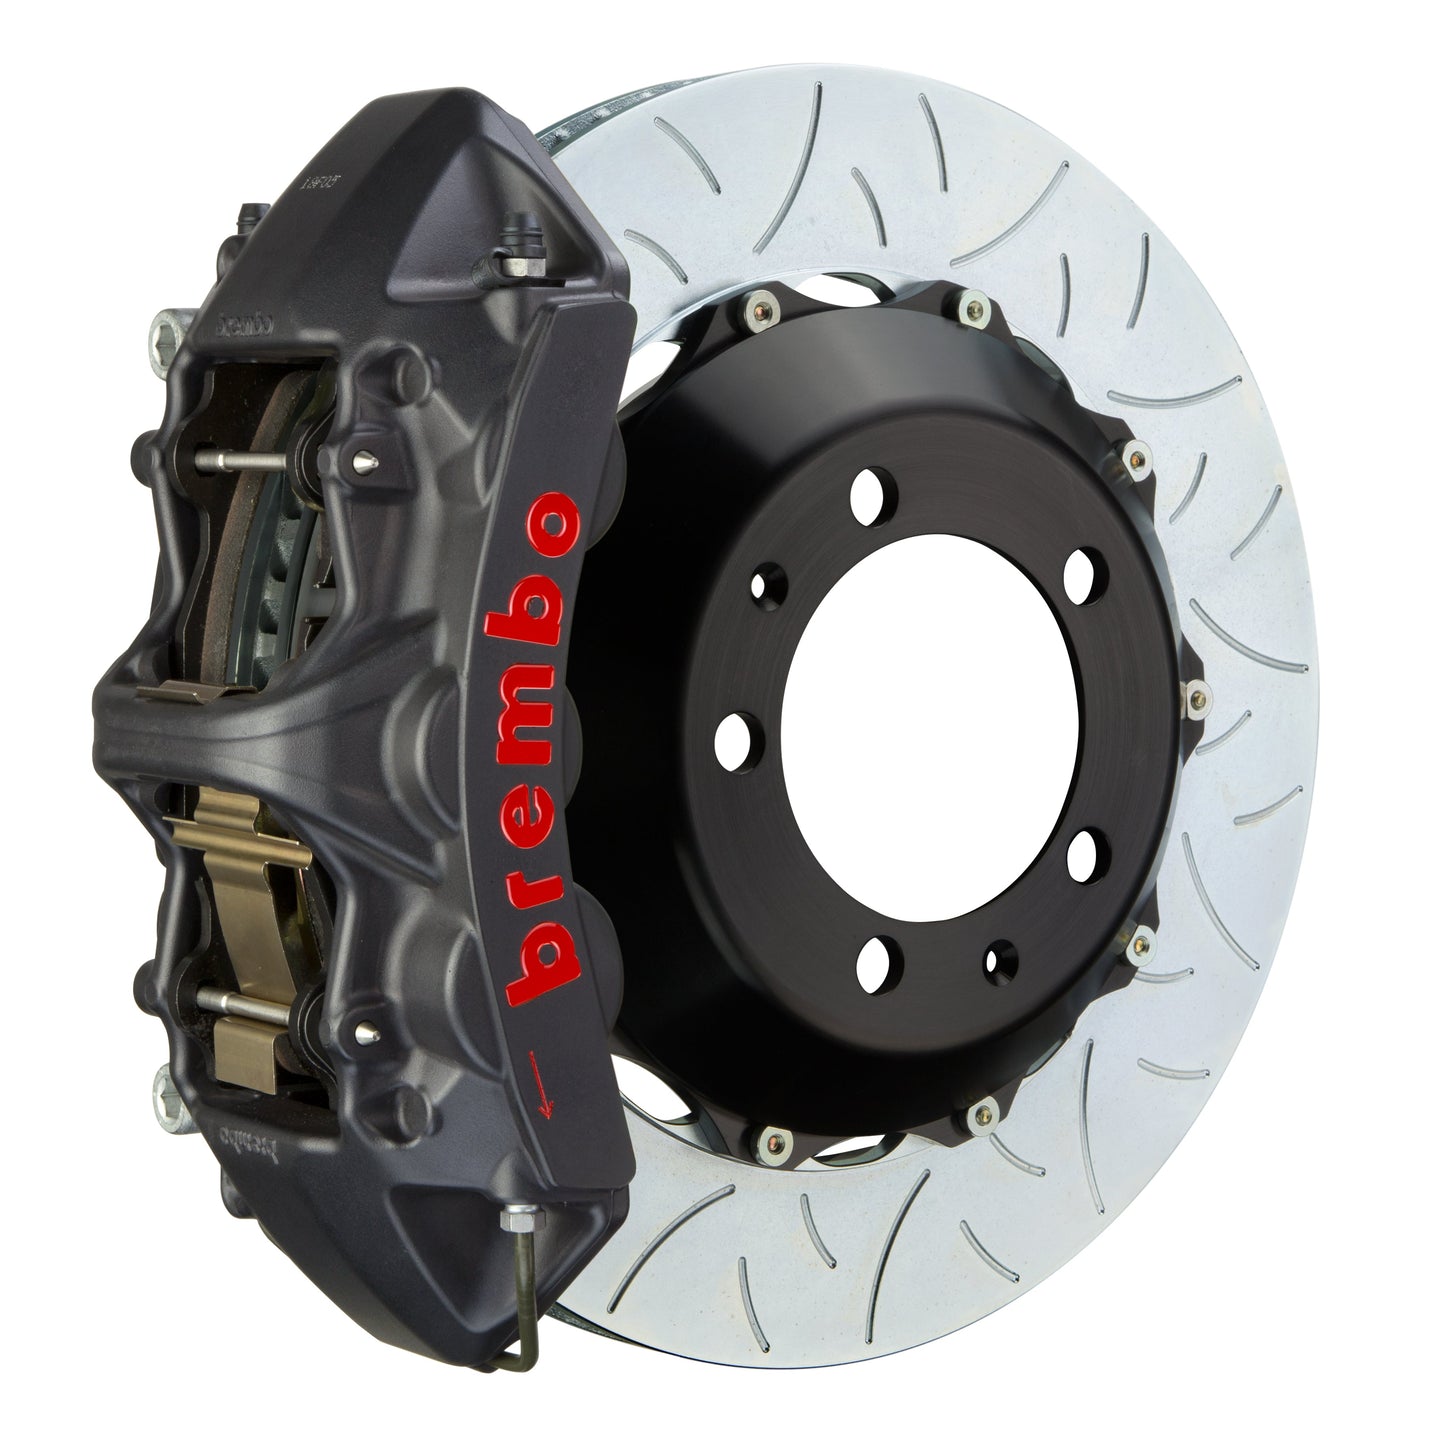 Front Brembo Gran Turismo Braking Upgrade Kit (1M18035AS) GT / S6 Caliper with 6-Pistons & 2-piece 355x32 Disc